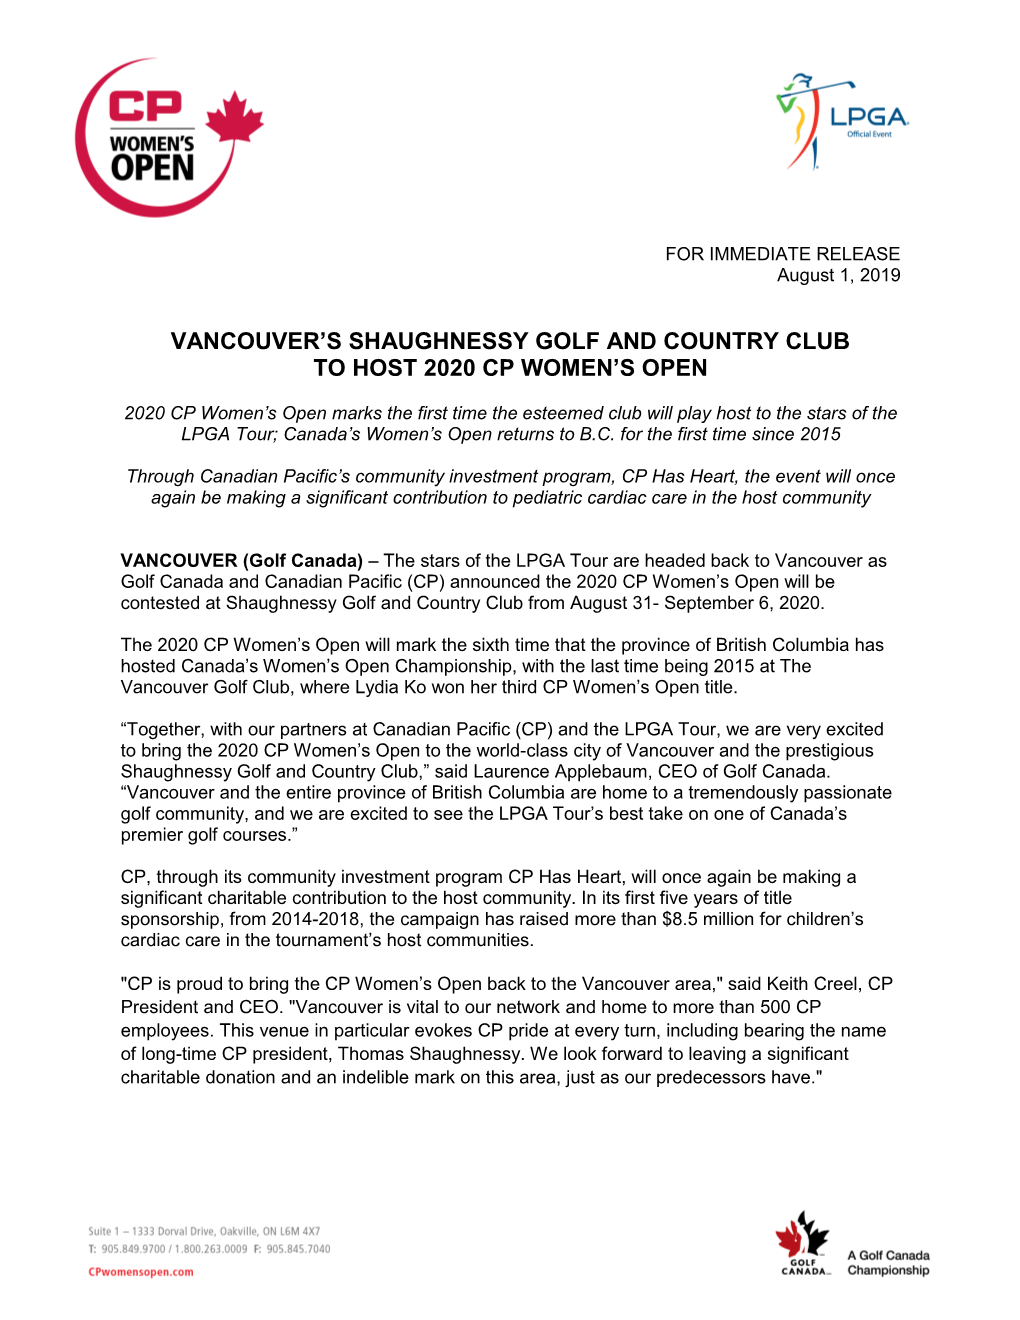 Vancouver's Shaughnessy Golf and Country Club to Host